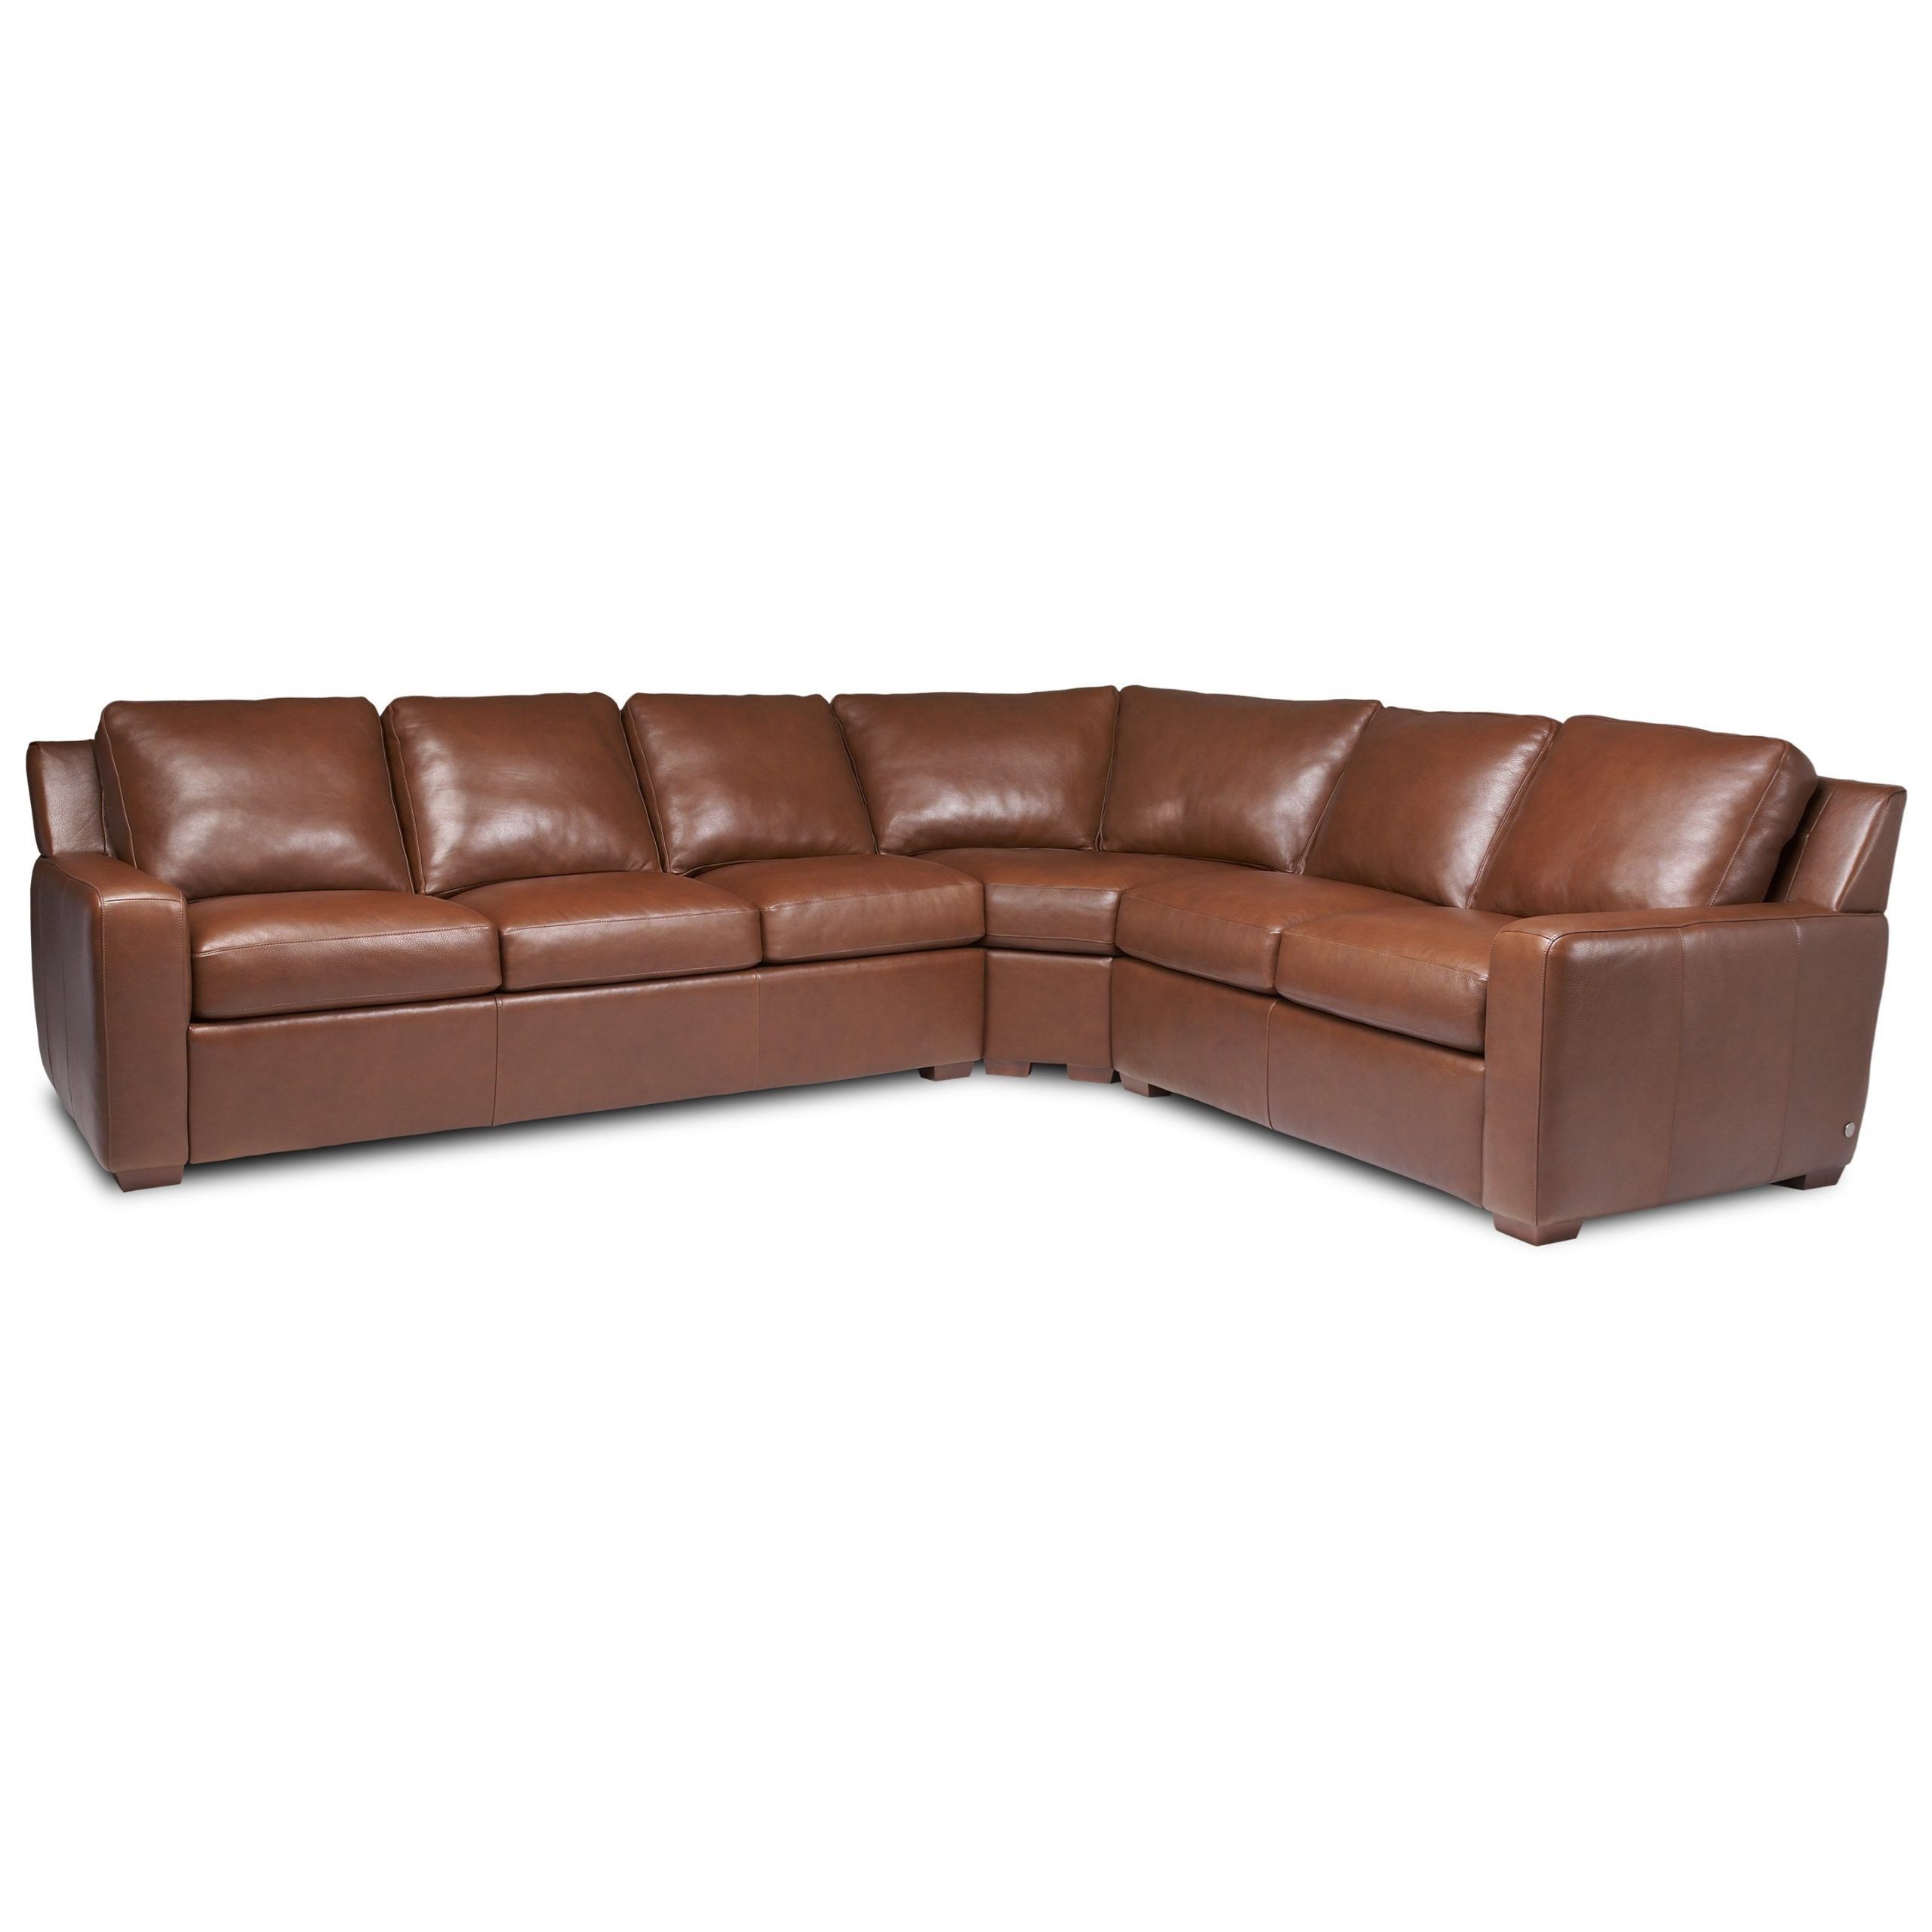 American Leather Lisben Contemporary L Shaped Sectional | Find Your With Modern L Shaped Sofa Sectionals (Gallery 16 of 20)